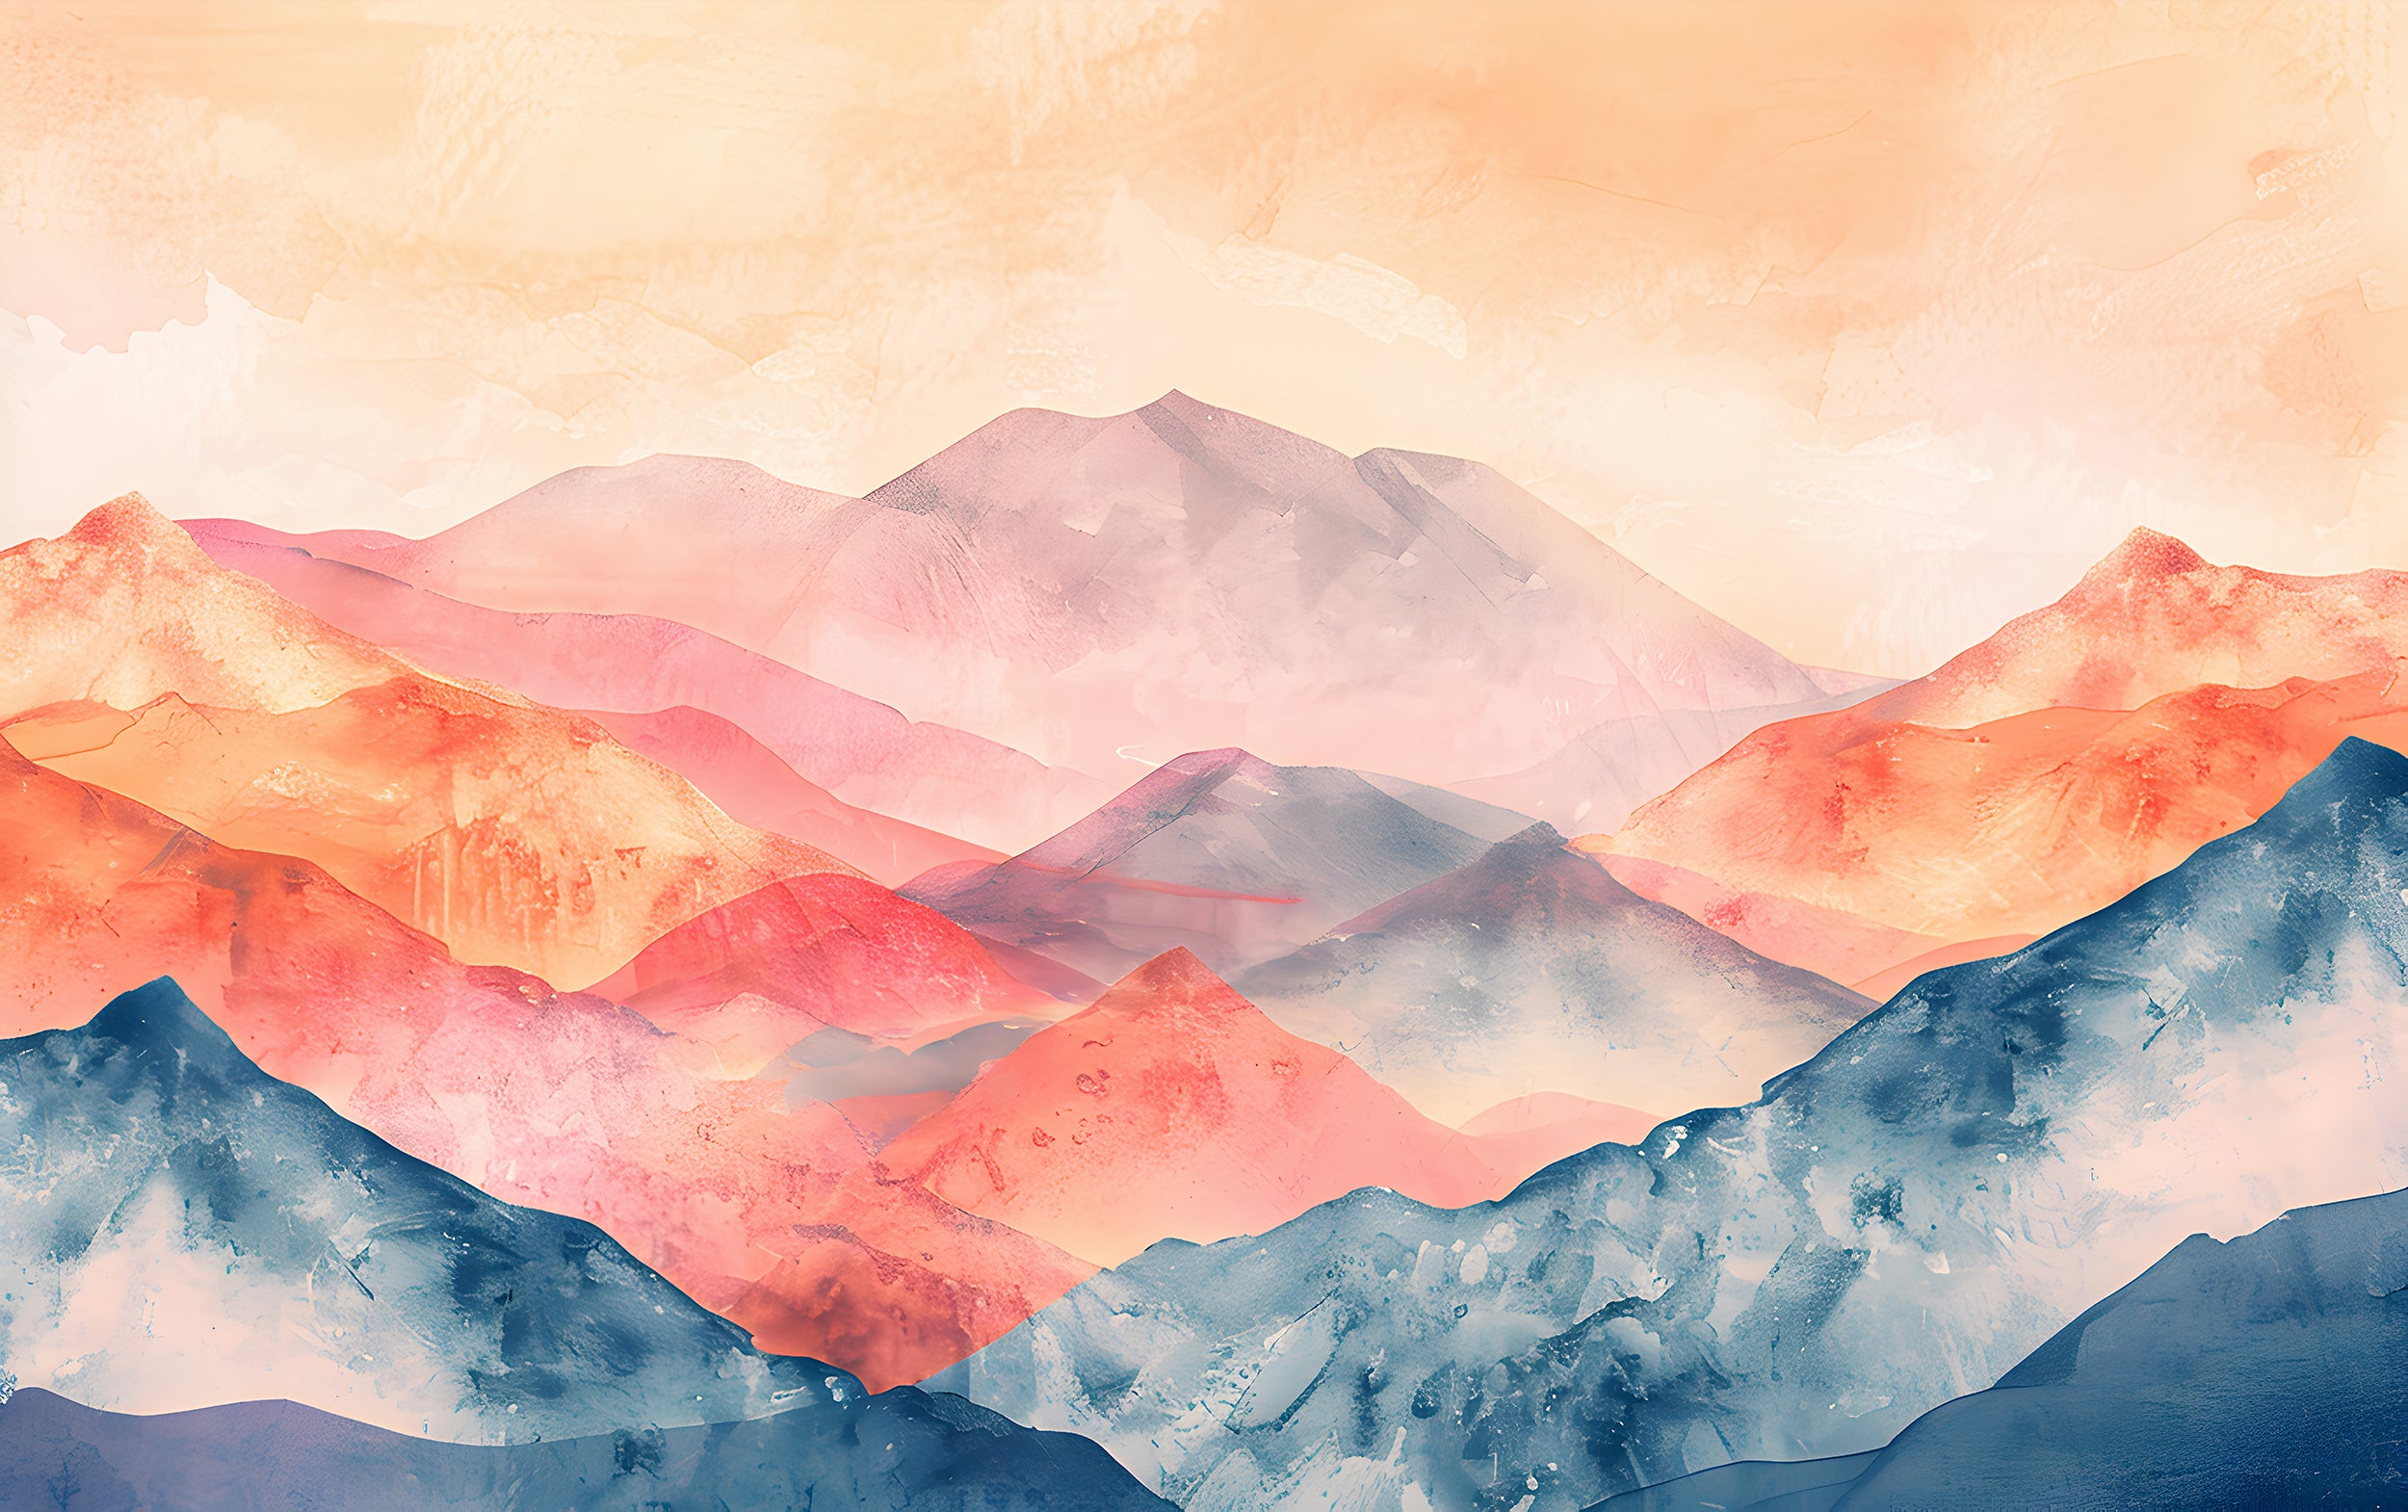 Abstract Mountains Mural, Colorful Peel and Stick Mountain Landscape Wallpaper, Watercolor Modern Style Removable Wall Mural, Custom Size Art